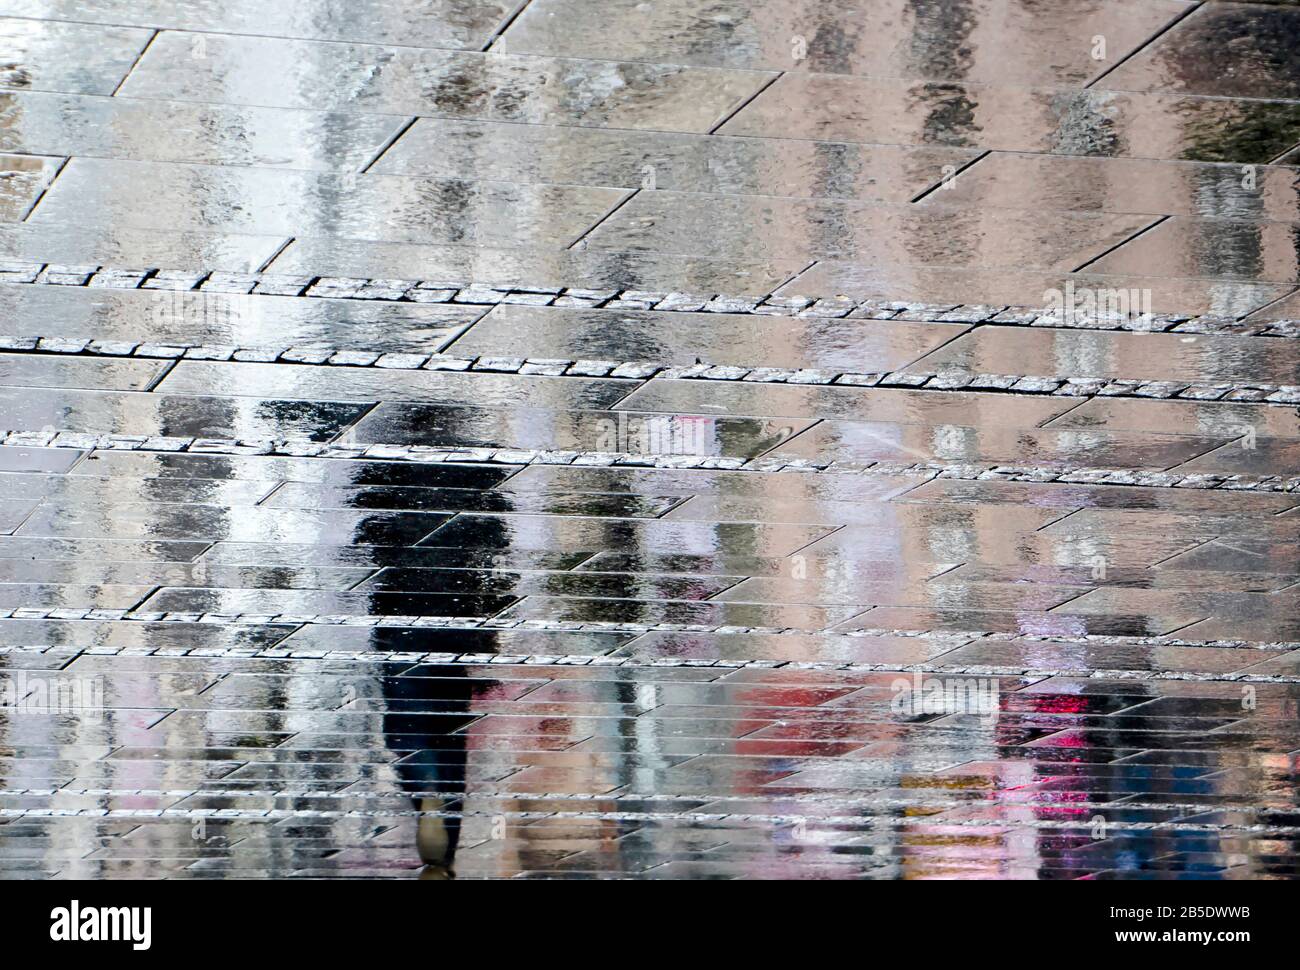 Abstract blurry background of reflection shadow silhouette in a puddle, of people walking alone city street in the rain Stock Photo